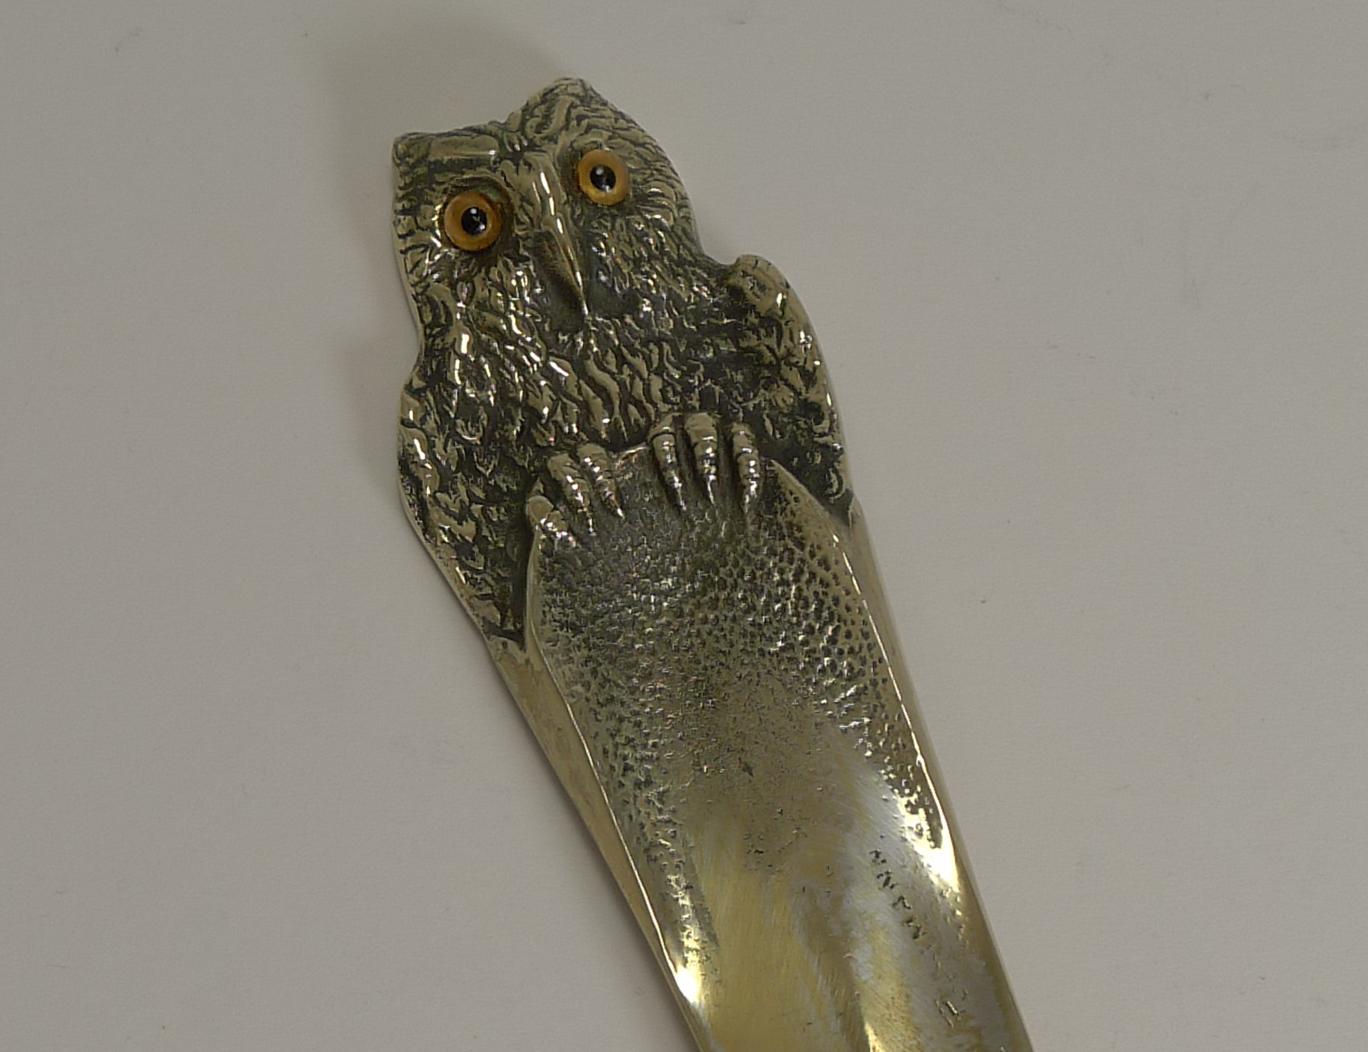 A fine and charming figural letter opener or paper knife made from solid cast brass with a novelty owl terminal. The blade is signed, it is hard to make out but ends in… mann, so I would imagine Austrian in origin.

The owl is beautifully executed